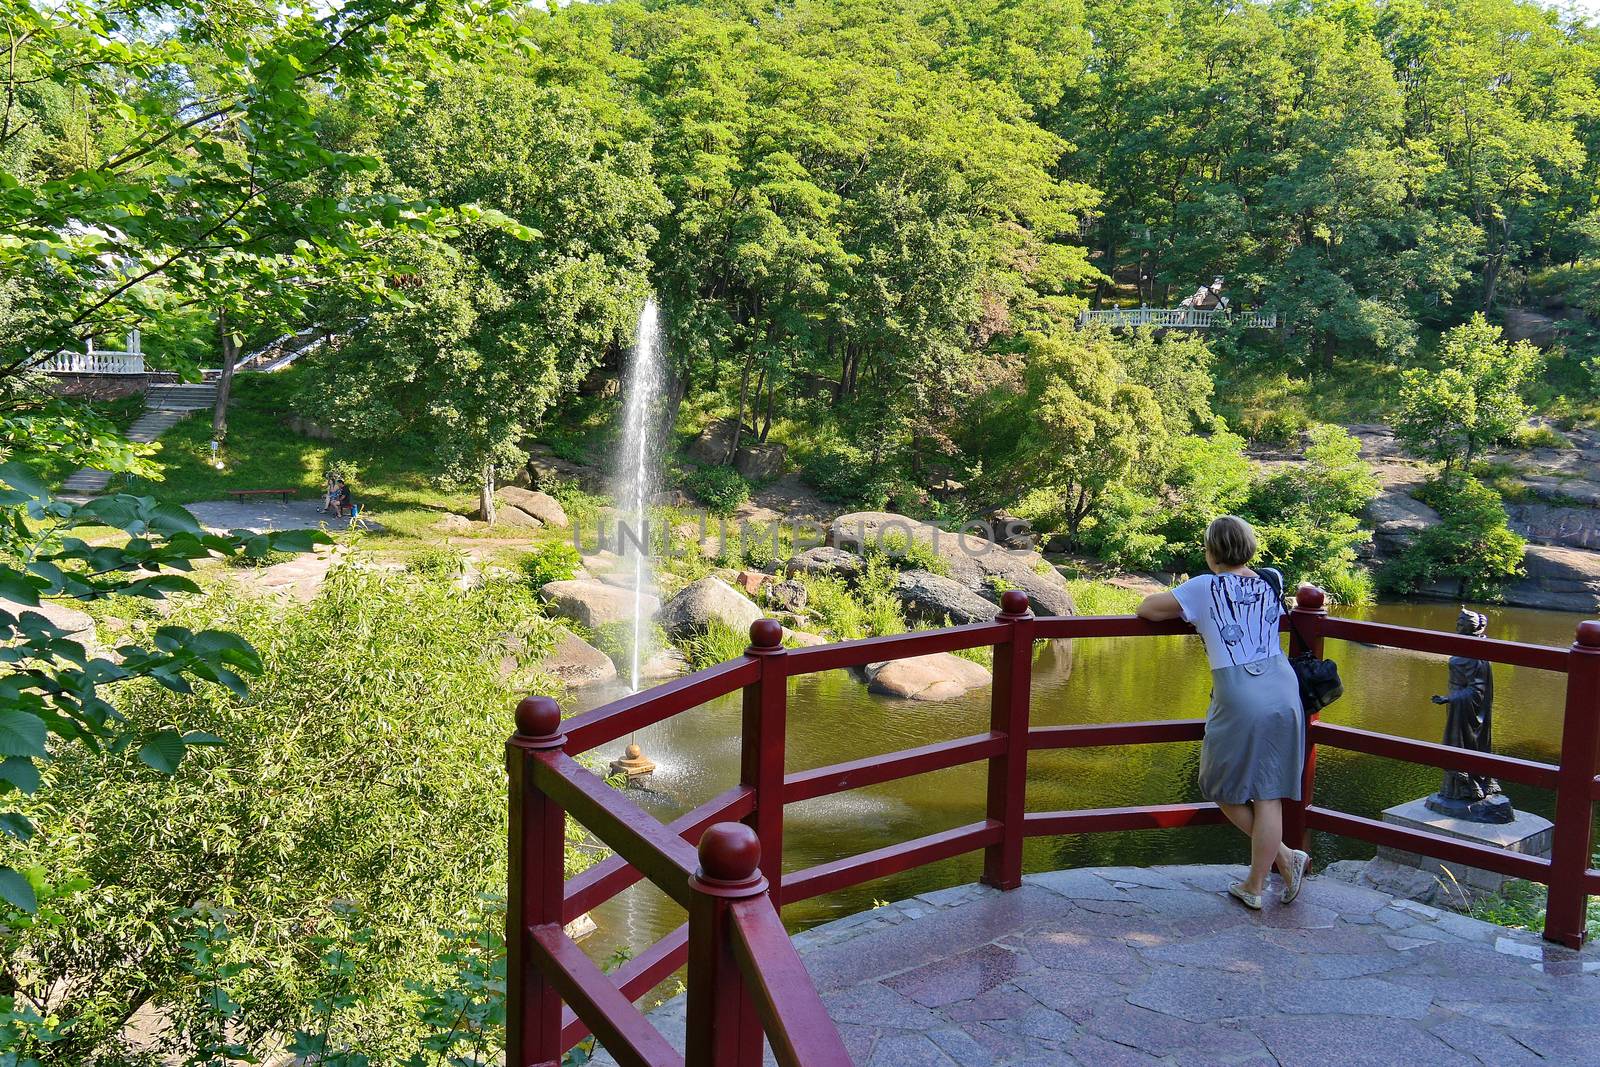 A panoramic view of the rocky river and the fountain surrounded by tall, lush trees